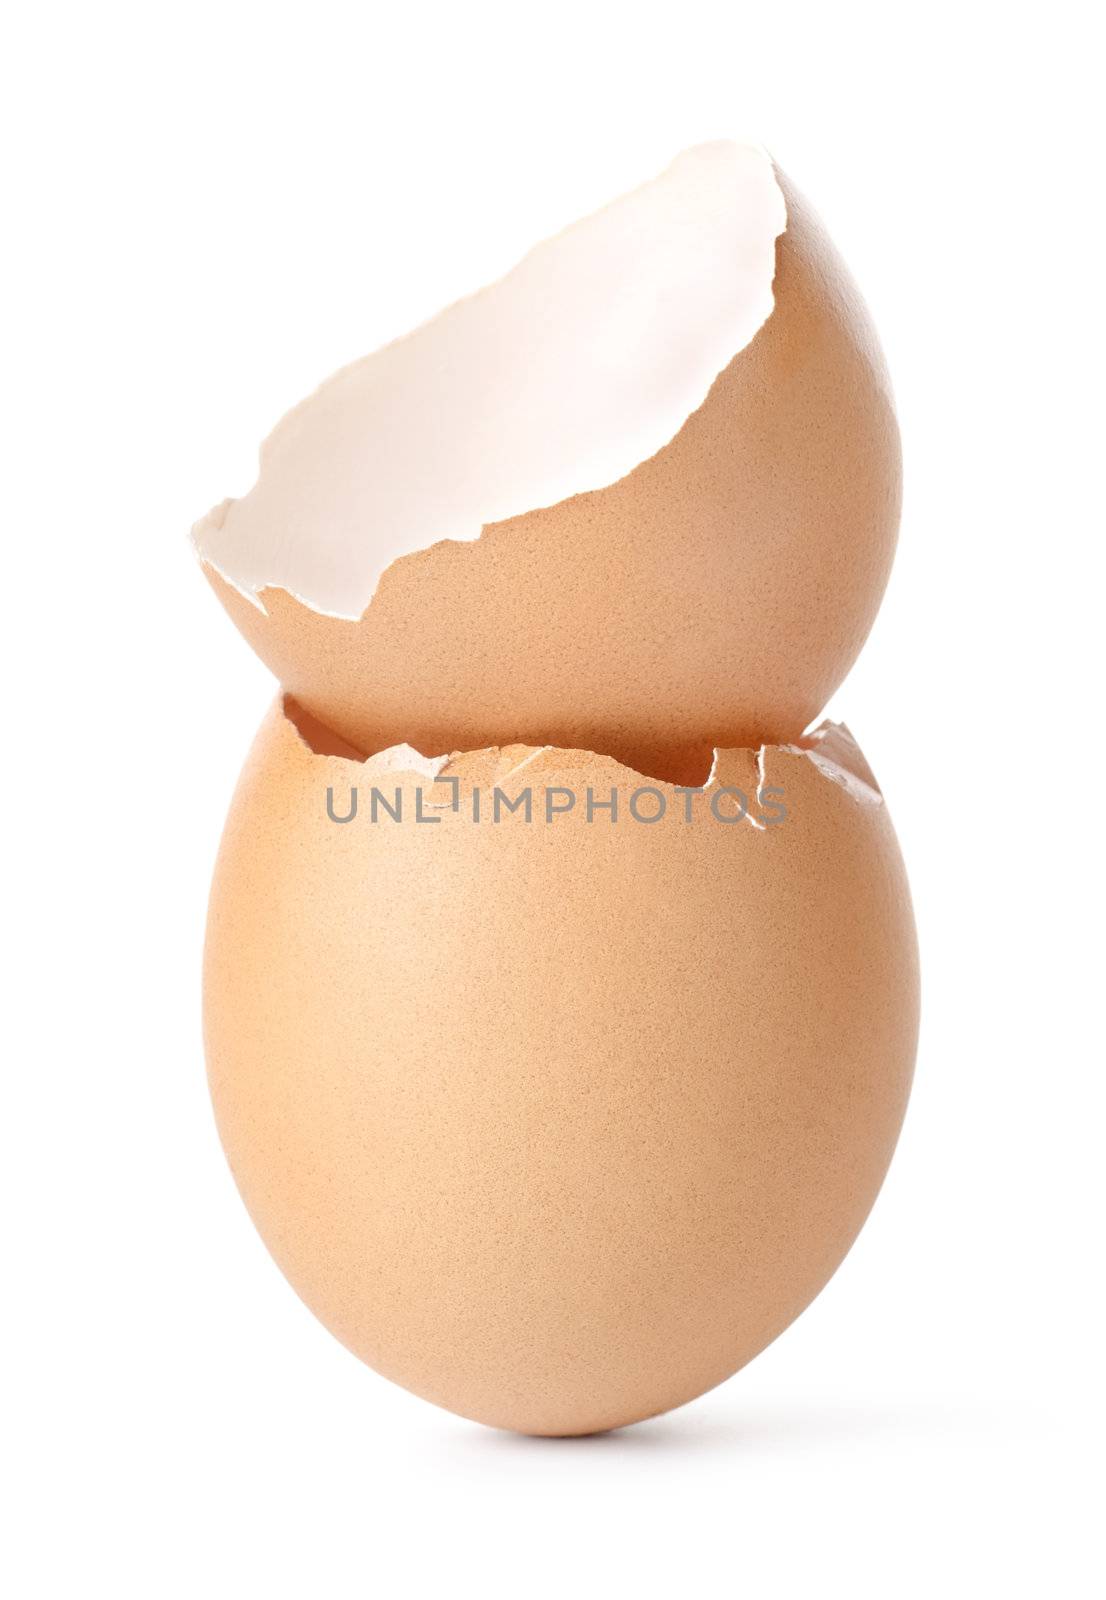 Empty egg shell isolated on a white background